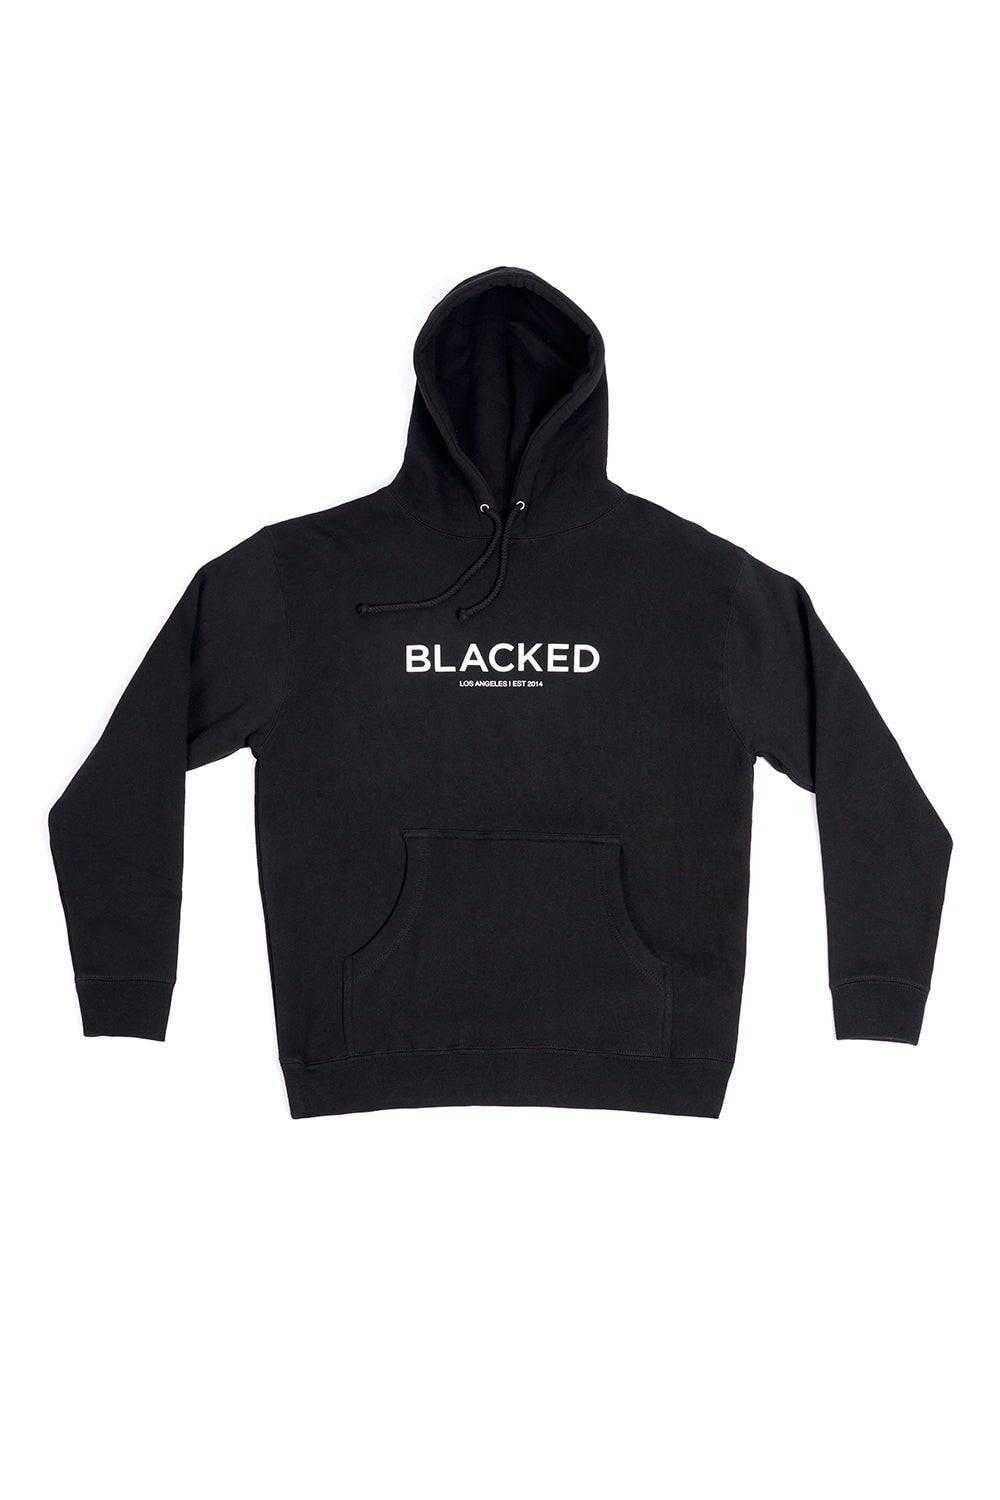 Official BLACKED undergarments now available! Blacked Underwear is Finally  Here! : r/BlackedWearHomemade